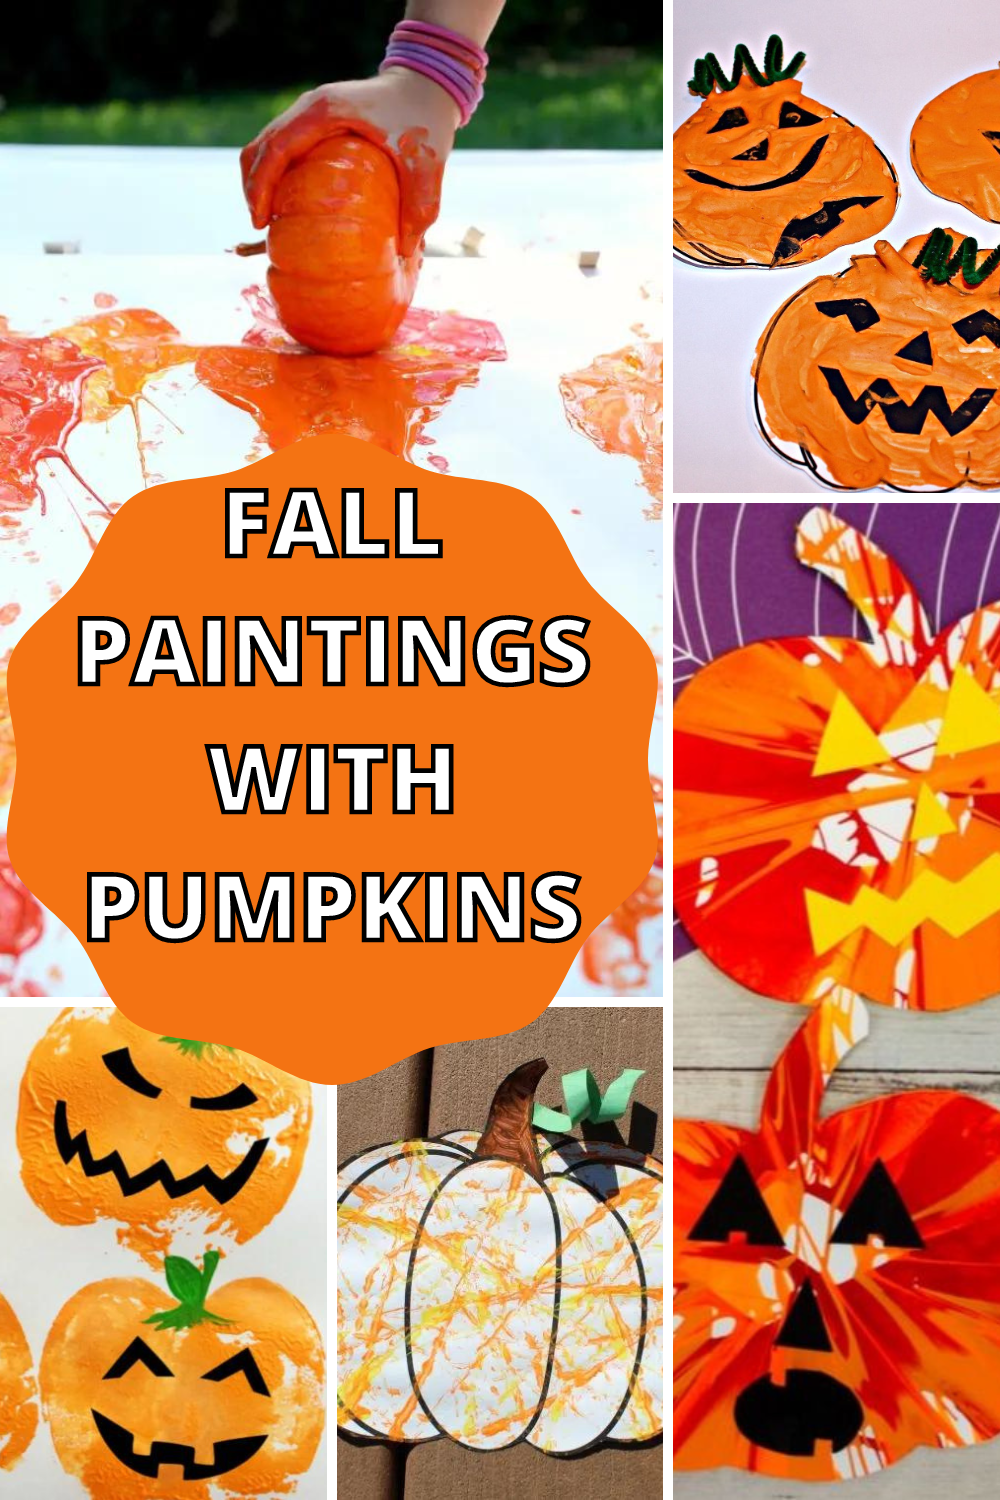 Fall Paintings with Pumpkins